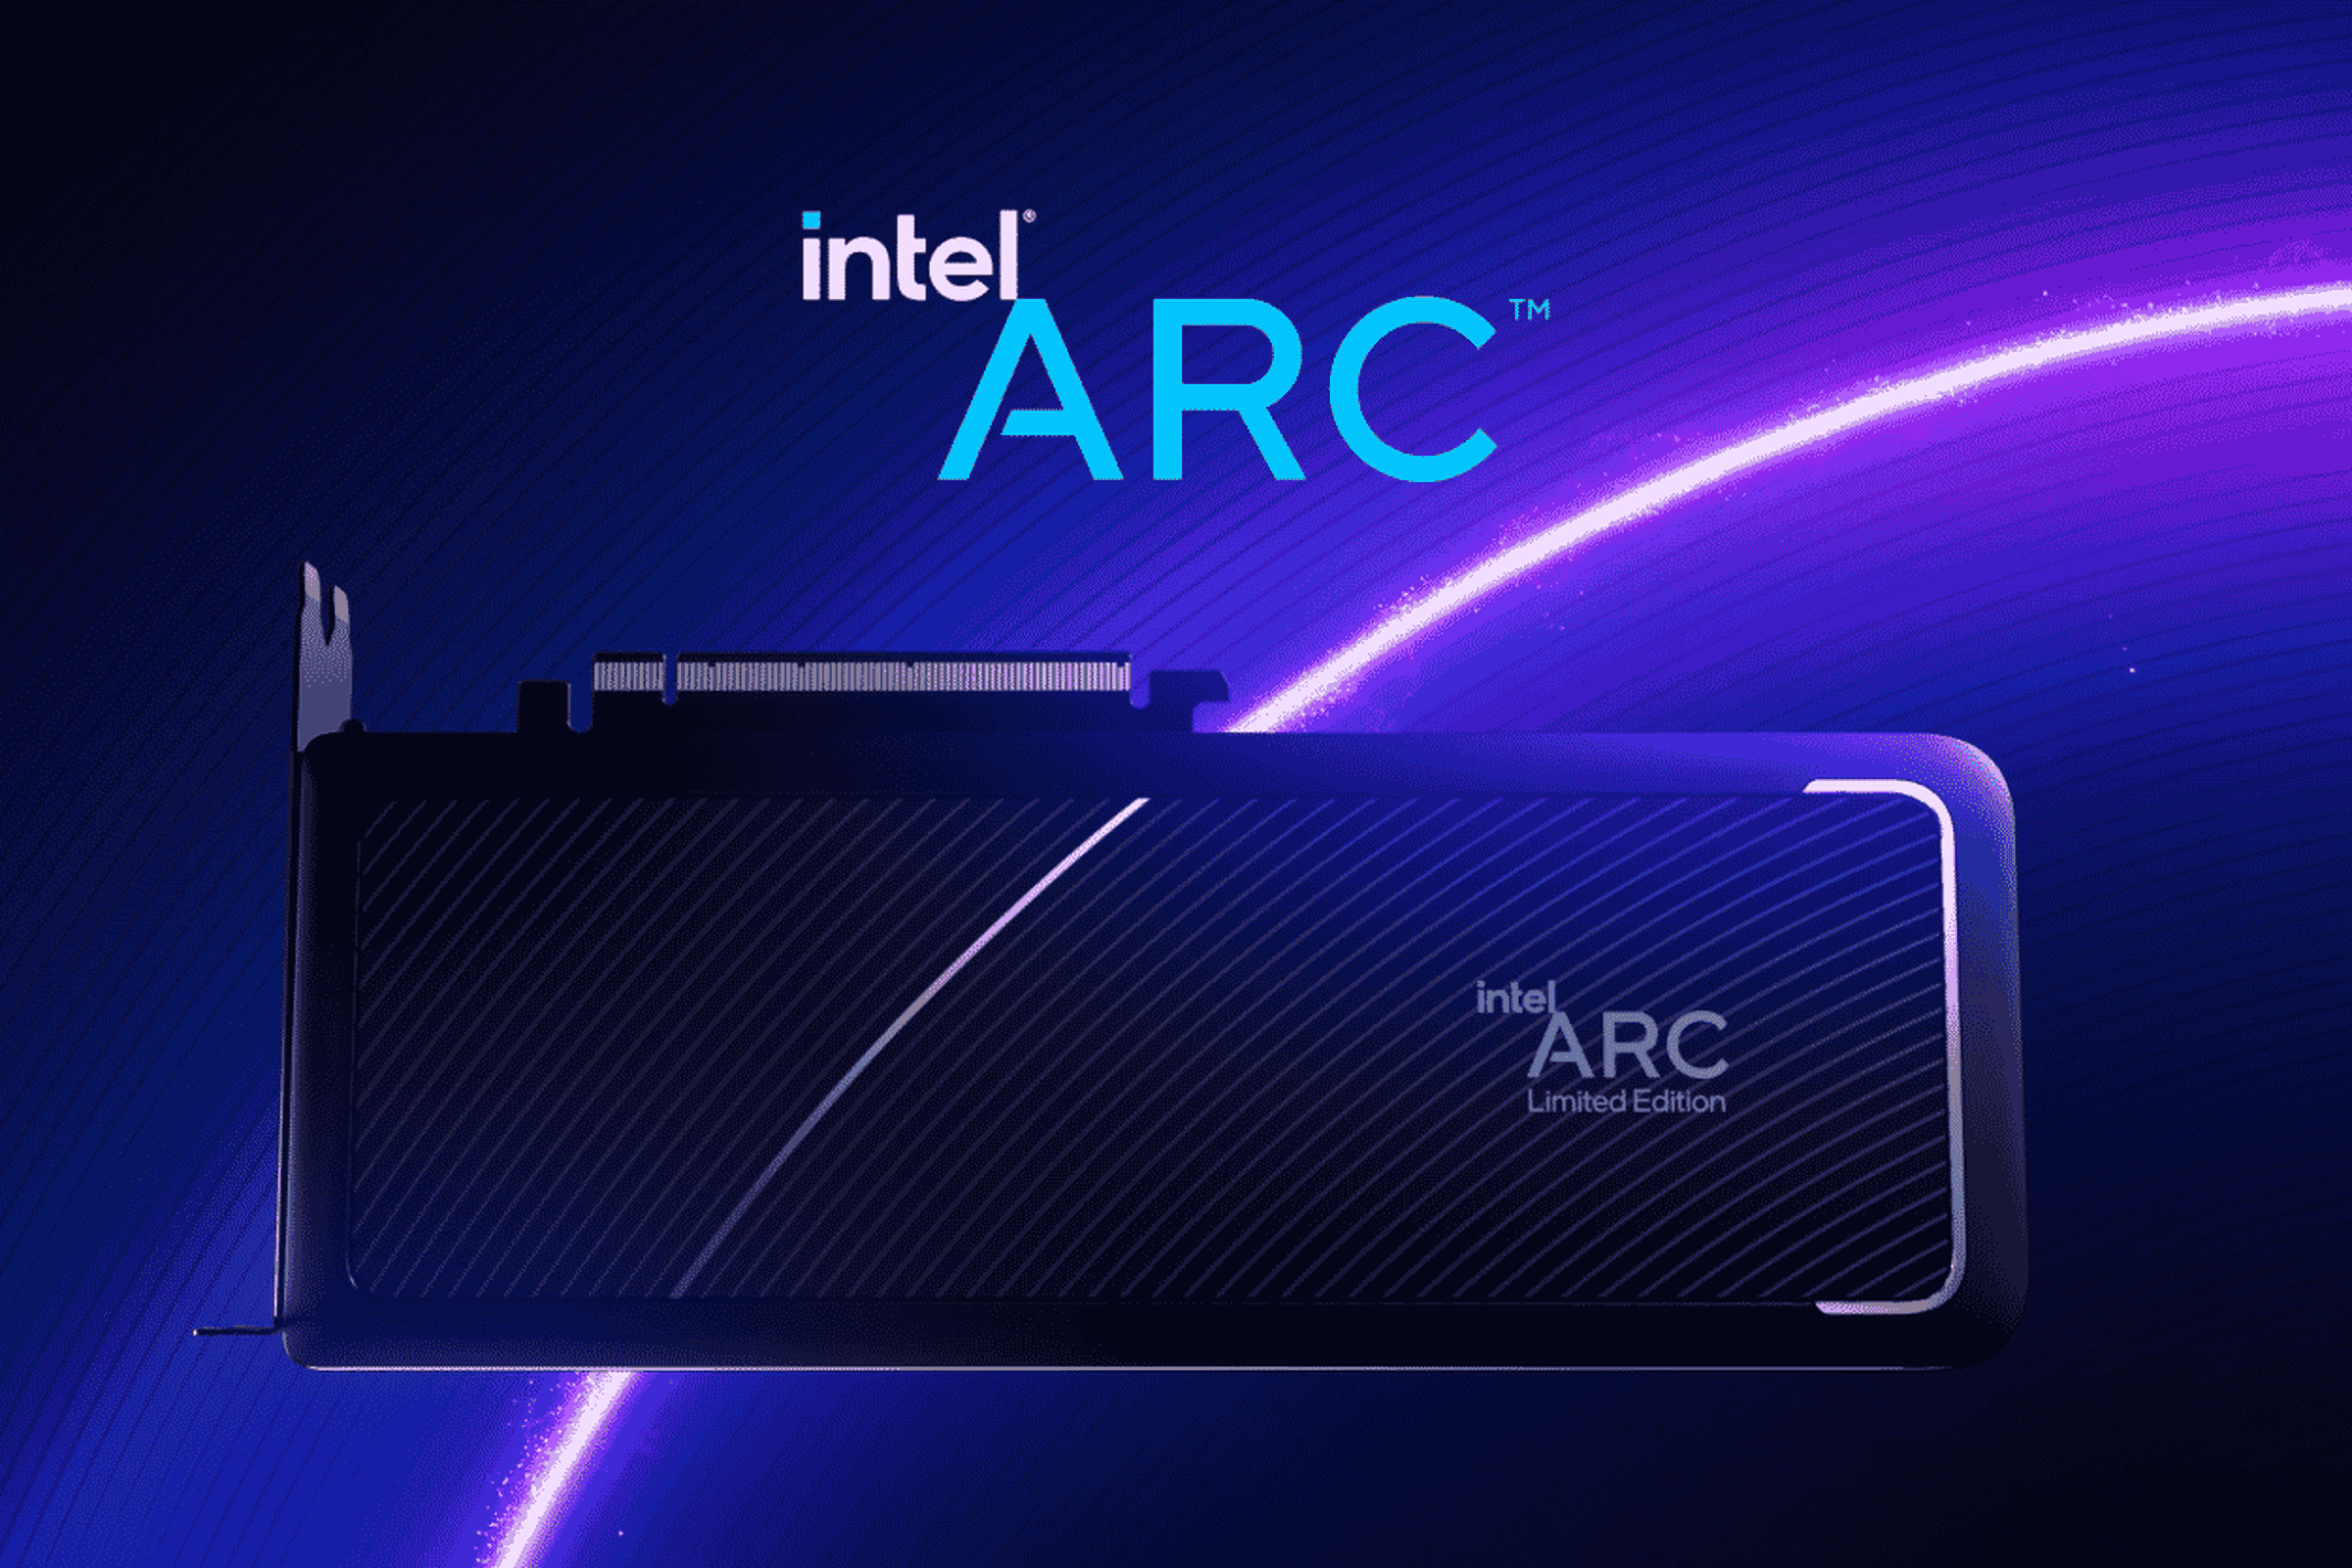 Intel’s Arc GPU that will launch for desktops on October 12th